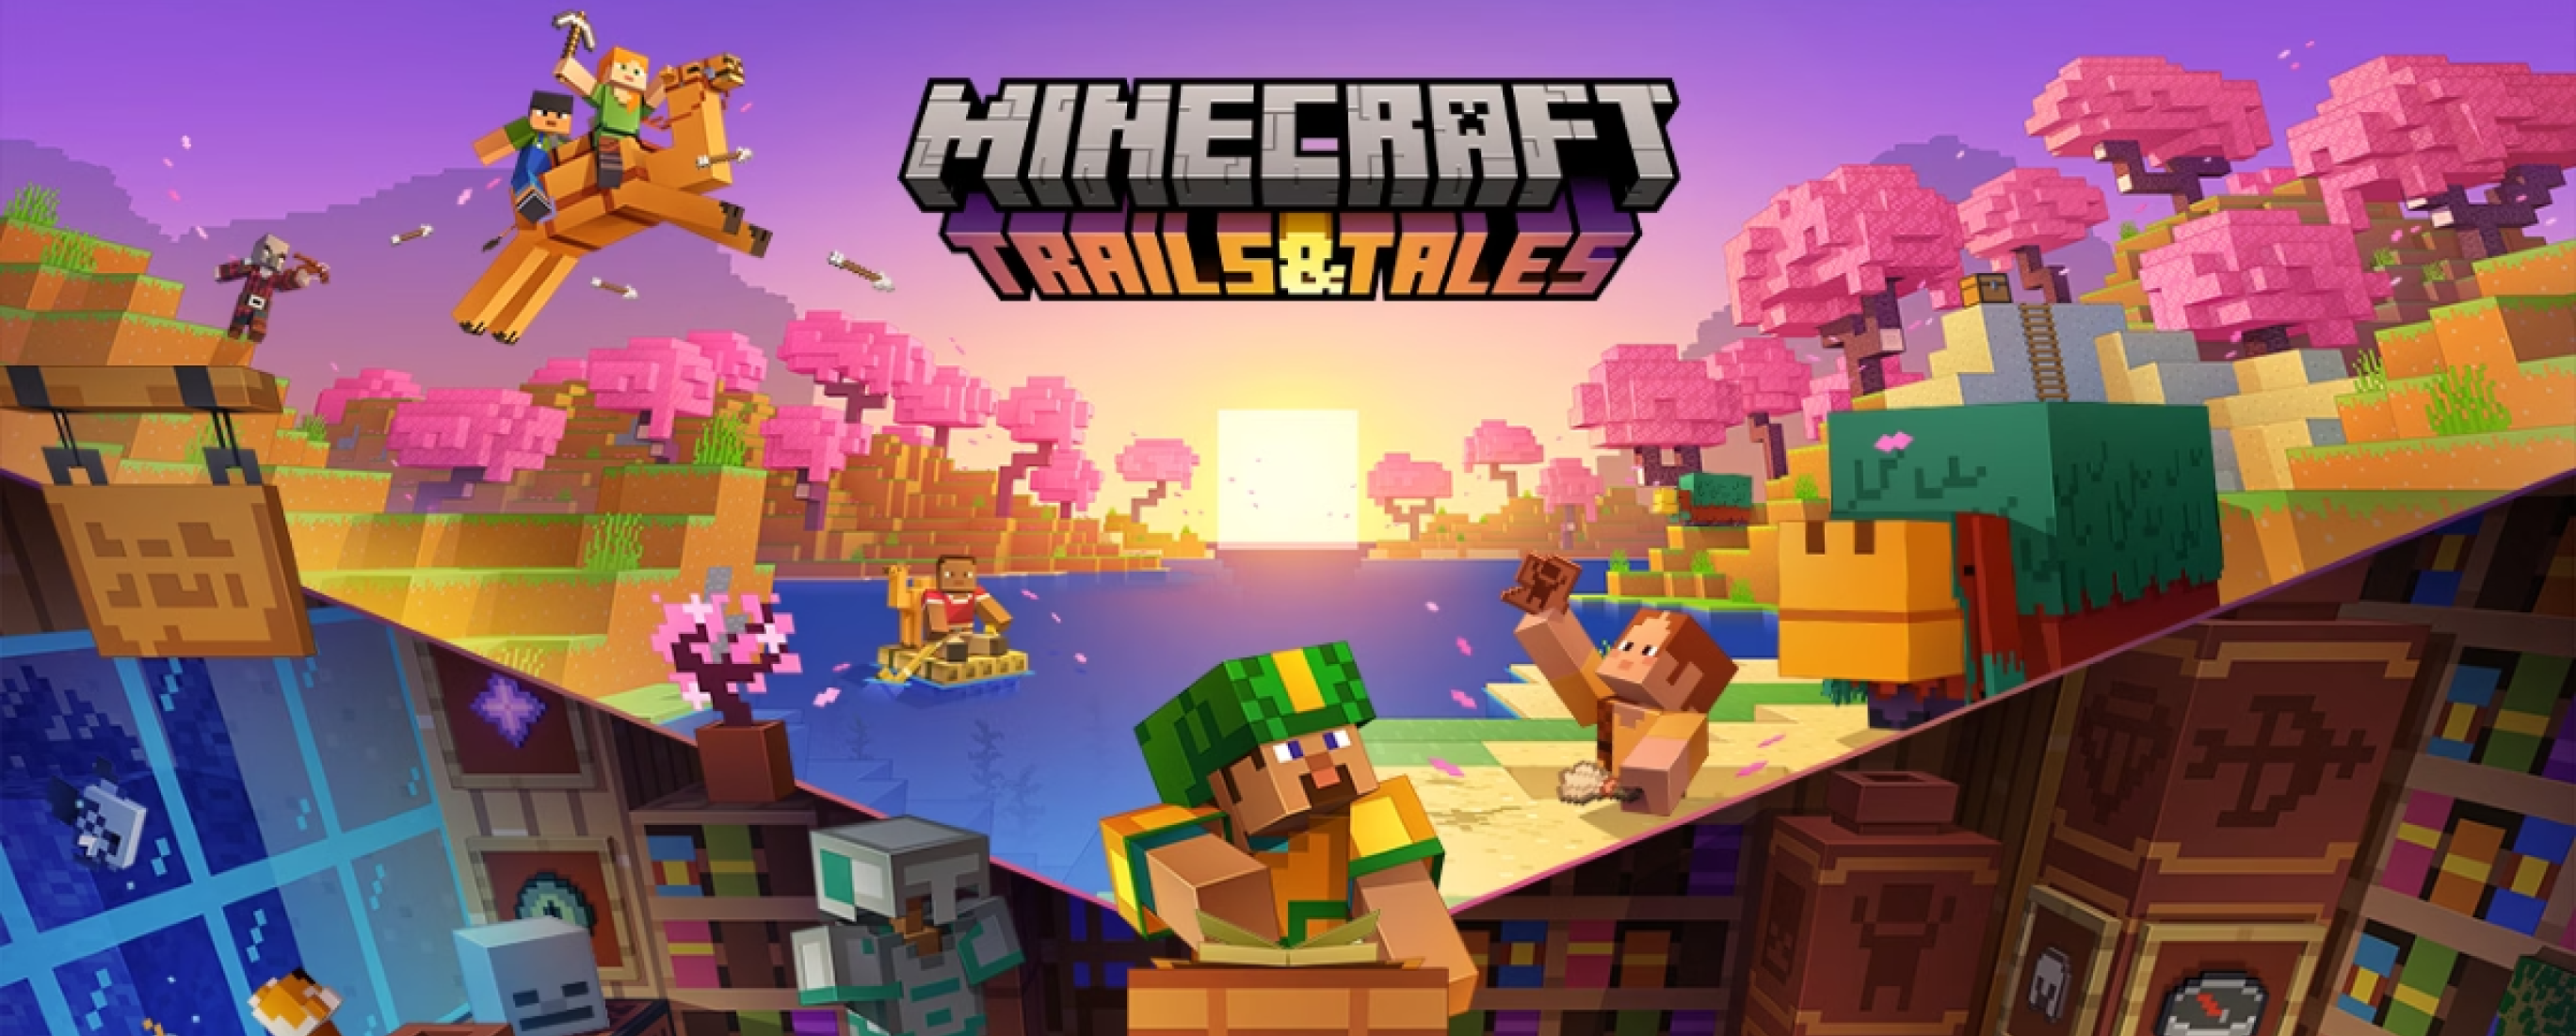 Minecraft 1.20 Trails & Tales update hero art with camels, archeology and more.